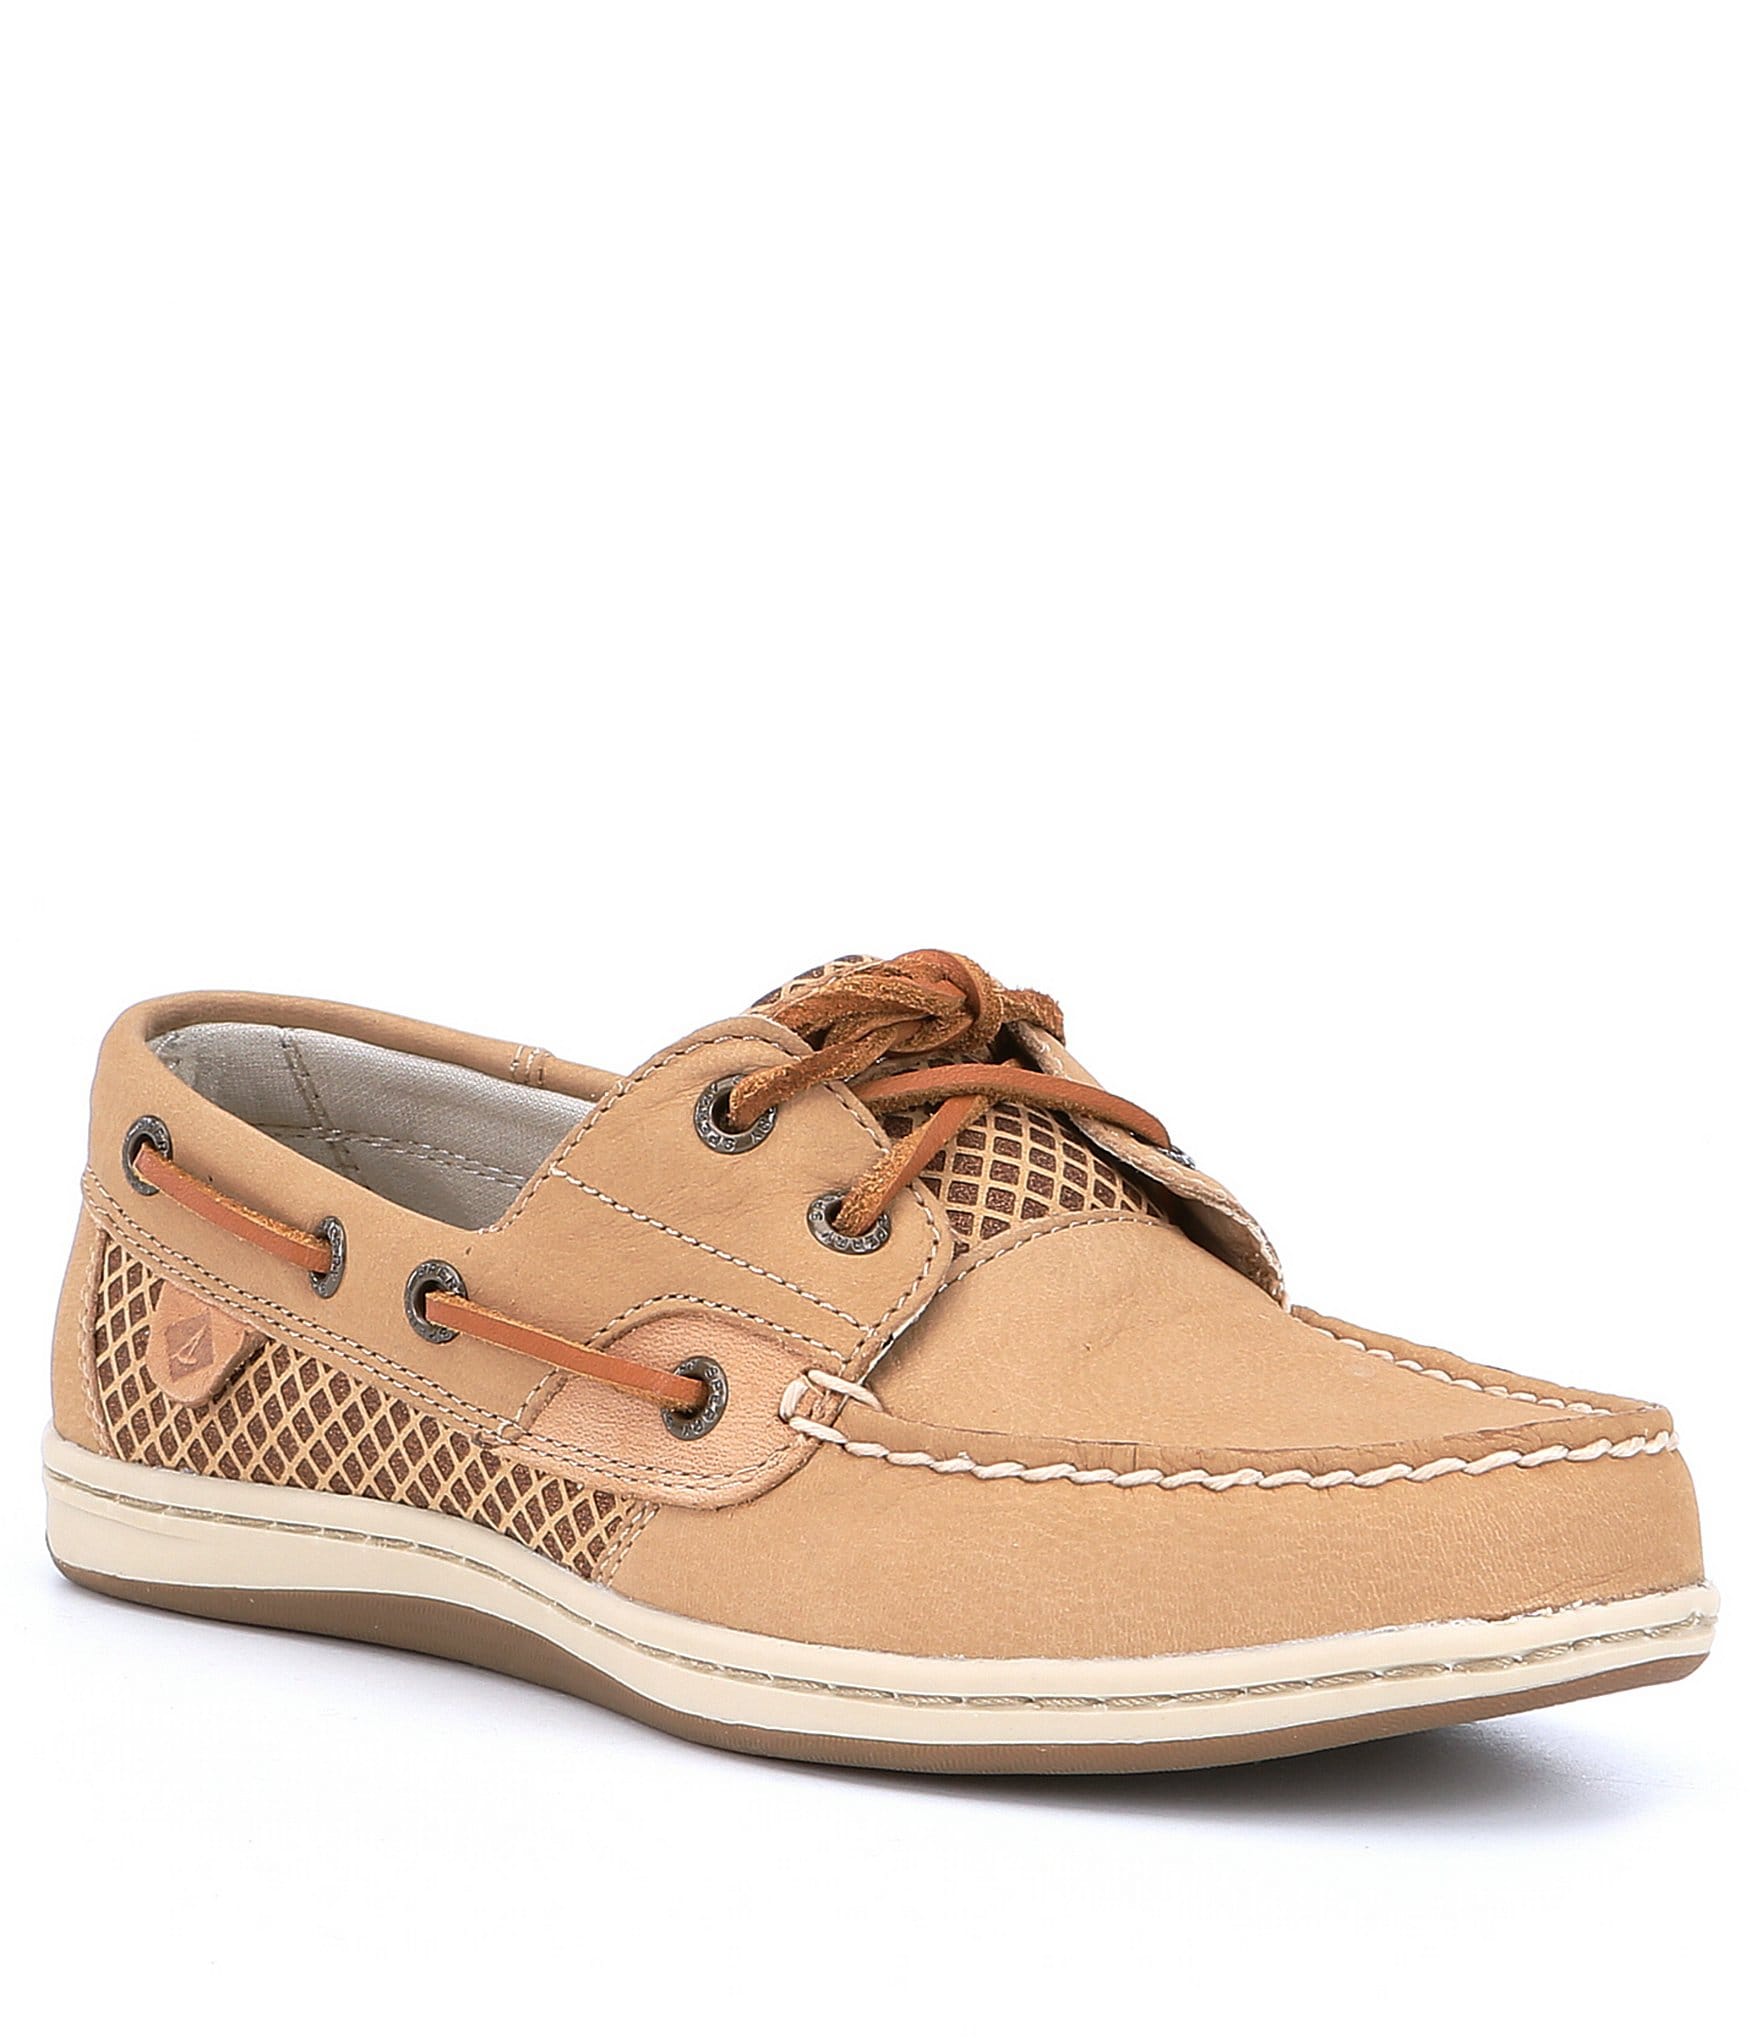 Sperry Koifish Etched Boat Shoes | Dillards